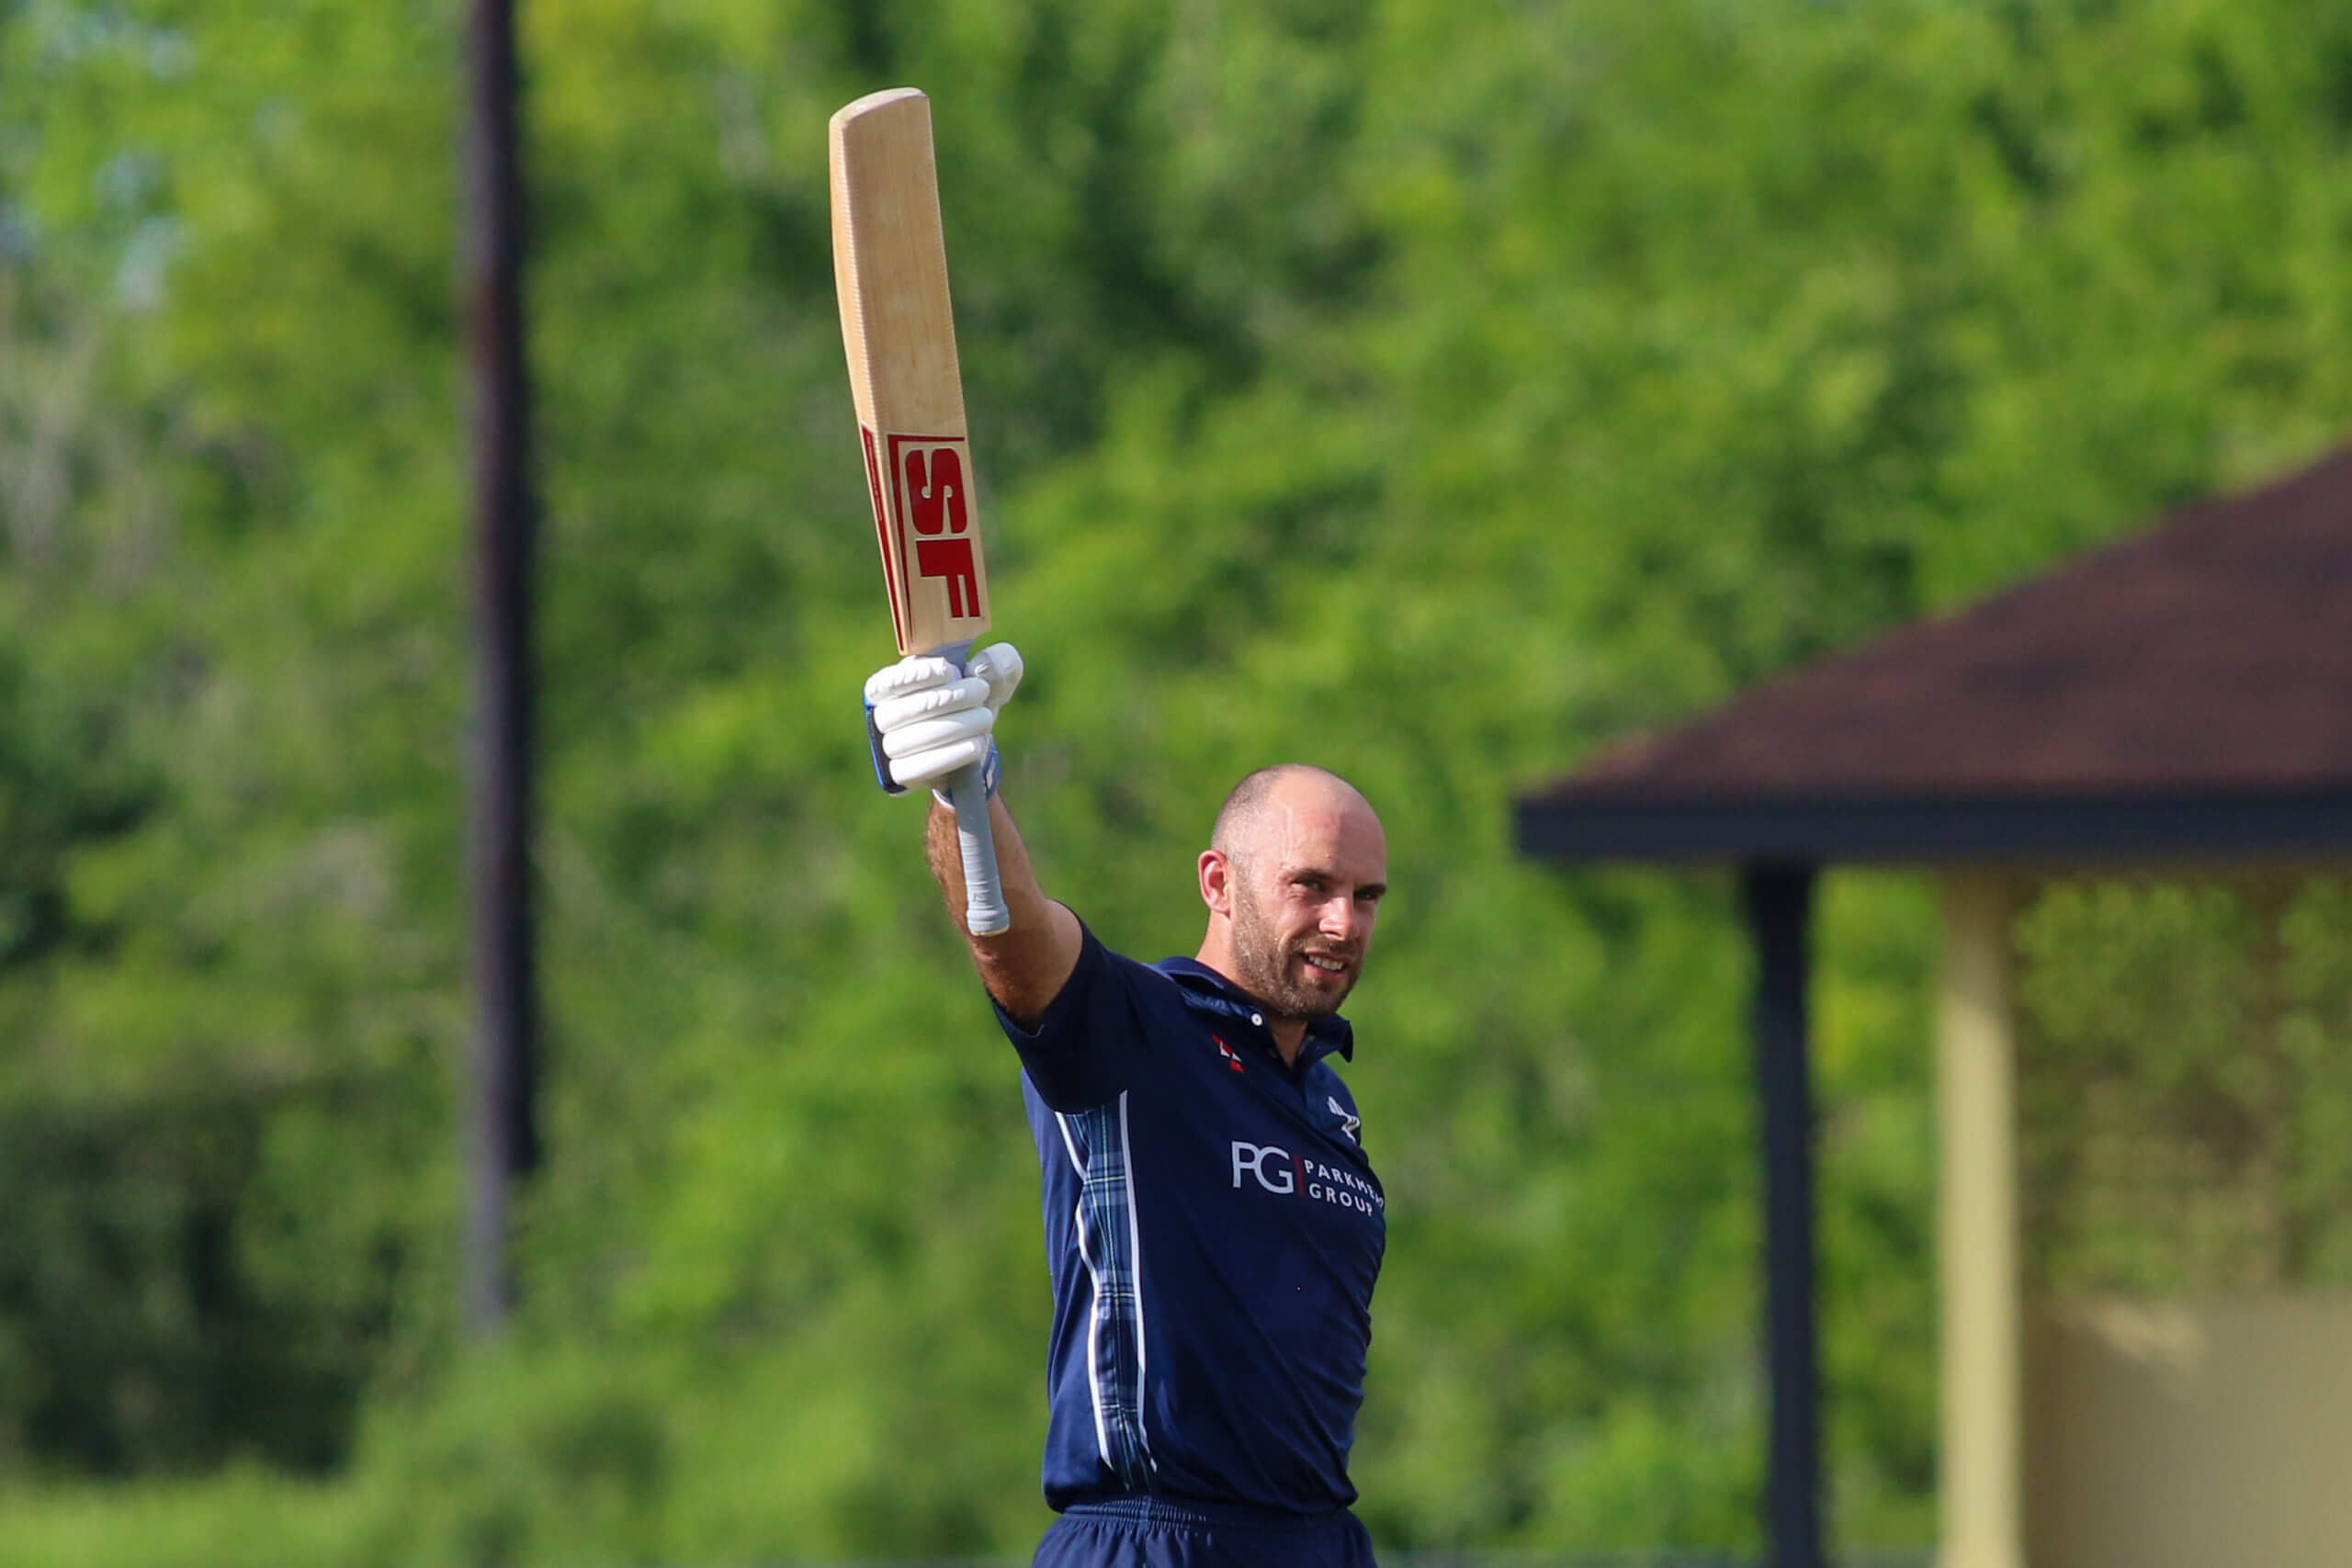 former-scotland-captain-kyle-coetzer-and-former-new-zealand-offspinner-will-somerville-announce-retirement